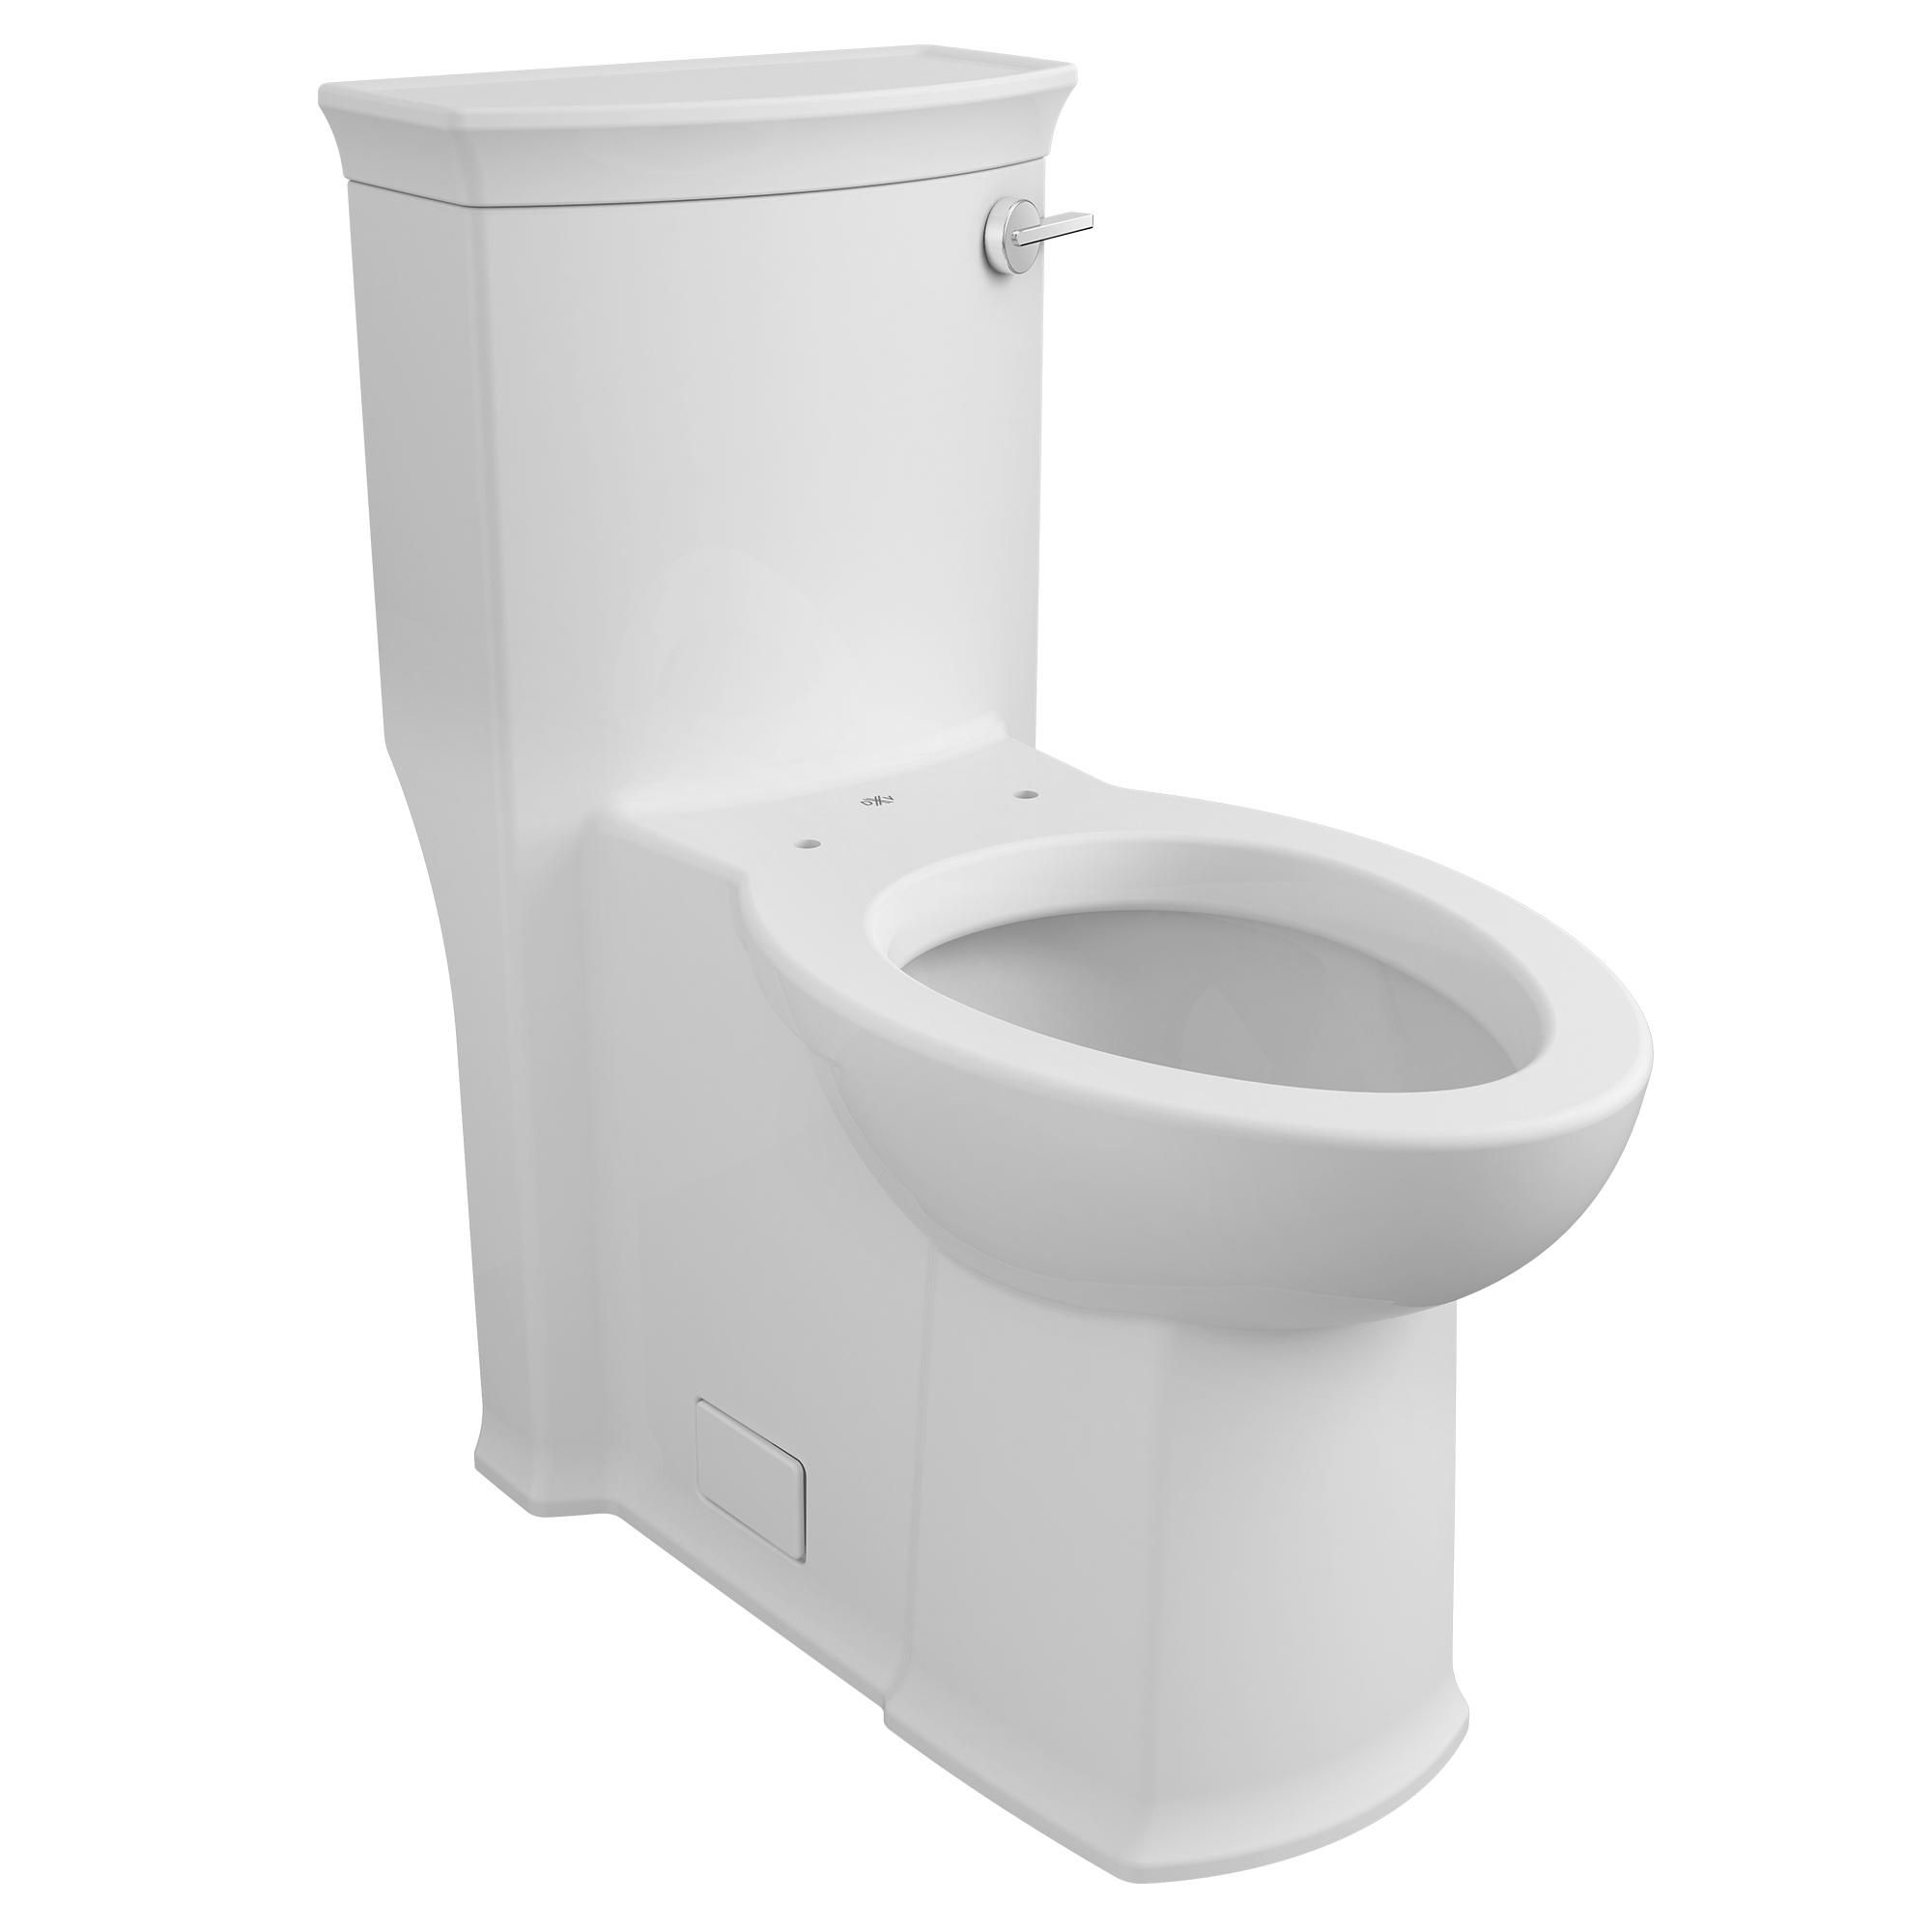 Wyatt® Chair-Height Elongated Toilet Bowl with Seat